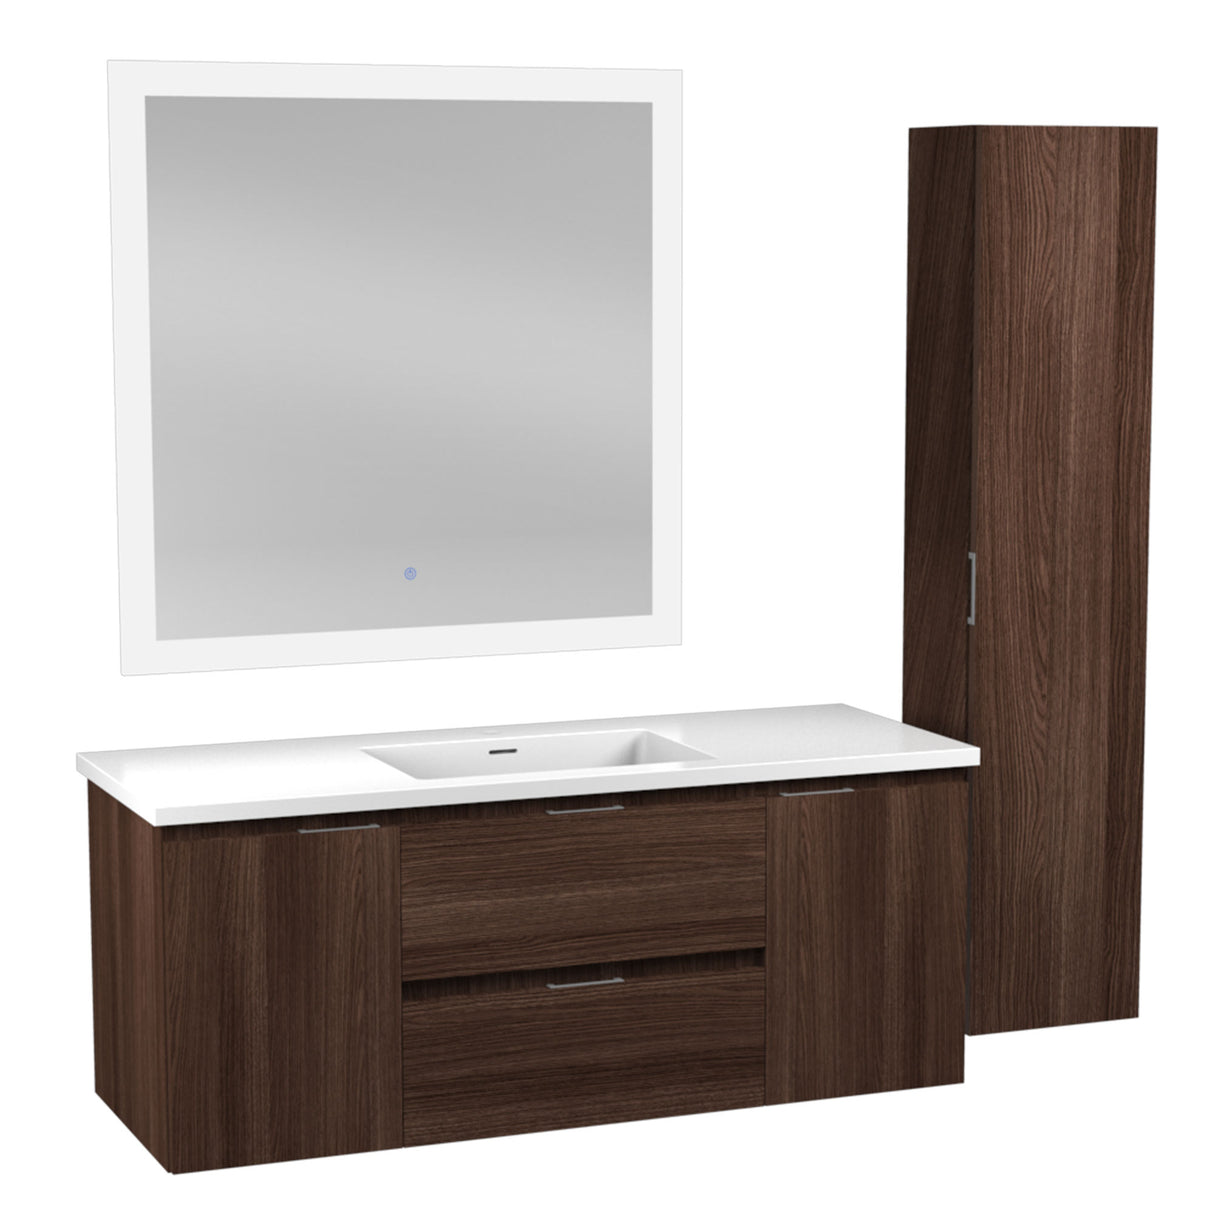 ANZZI VT-MR4SCCT48-DB 48 in. W x 20 in. H x 18 in. D Bath Vanity Set in Dark Brown with Vanity Top in White with White Basin and Mirror